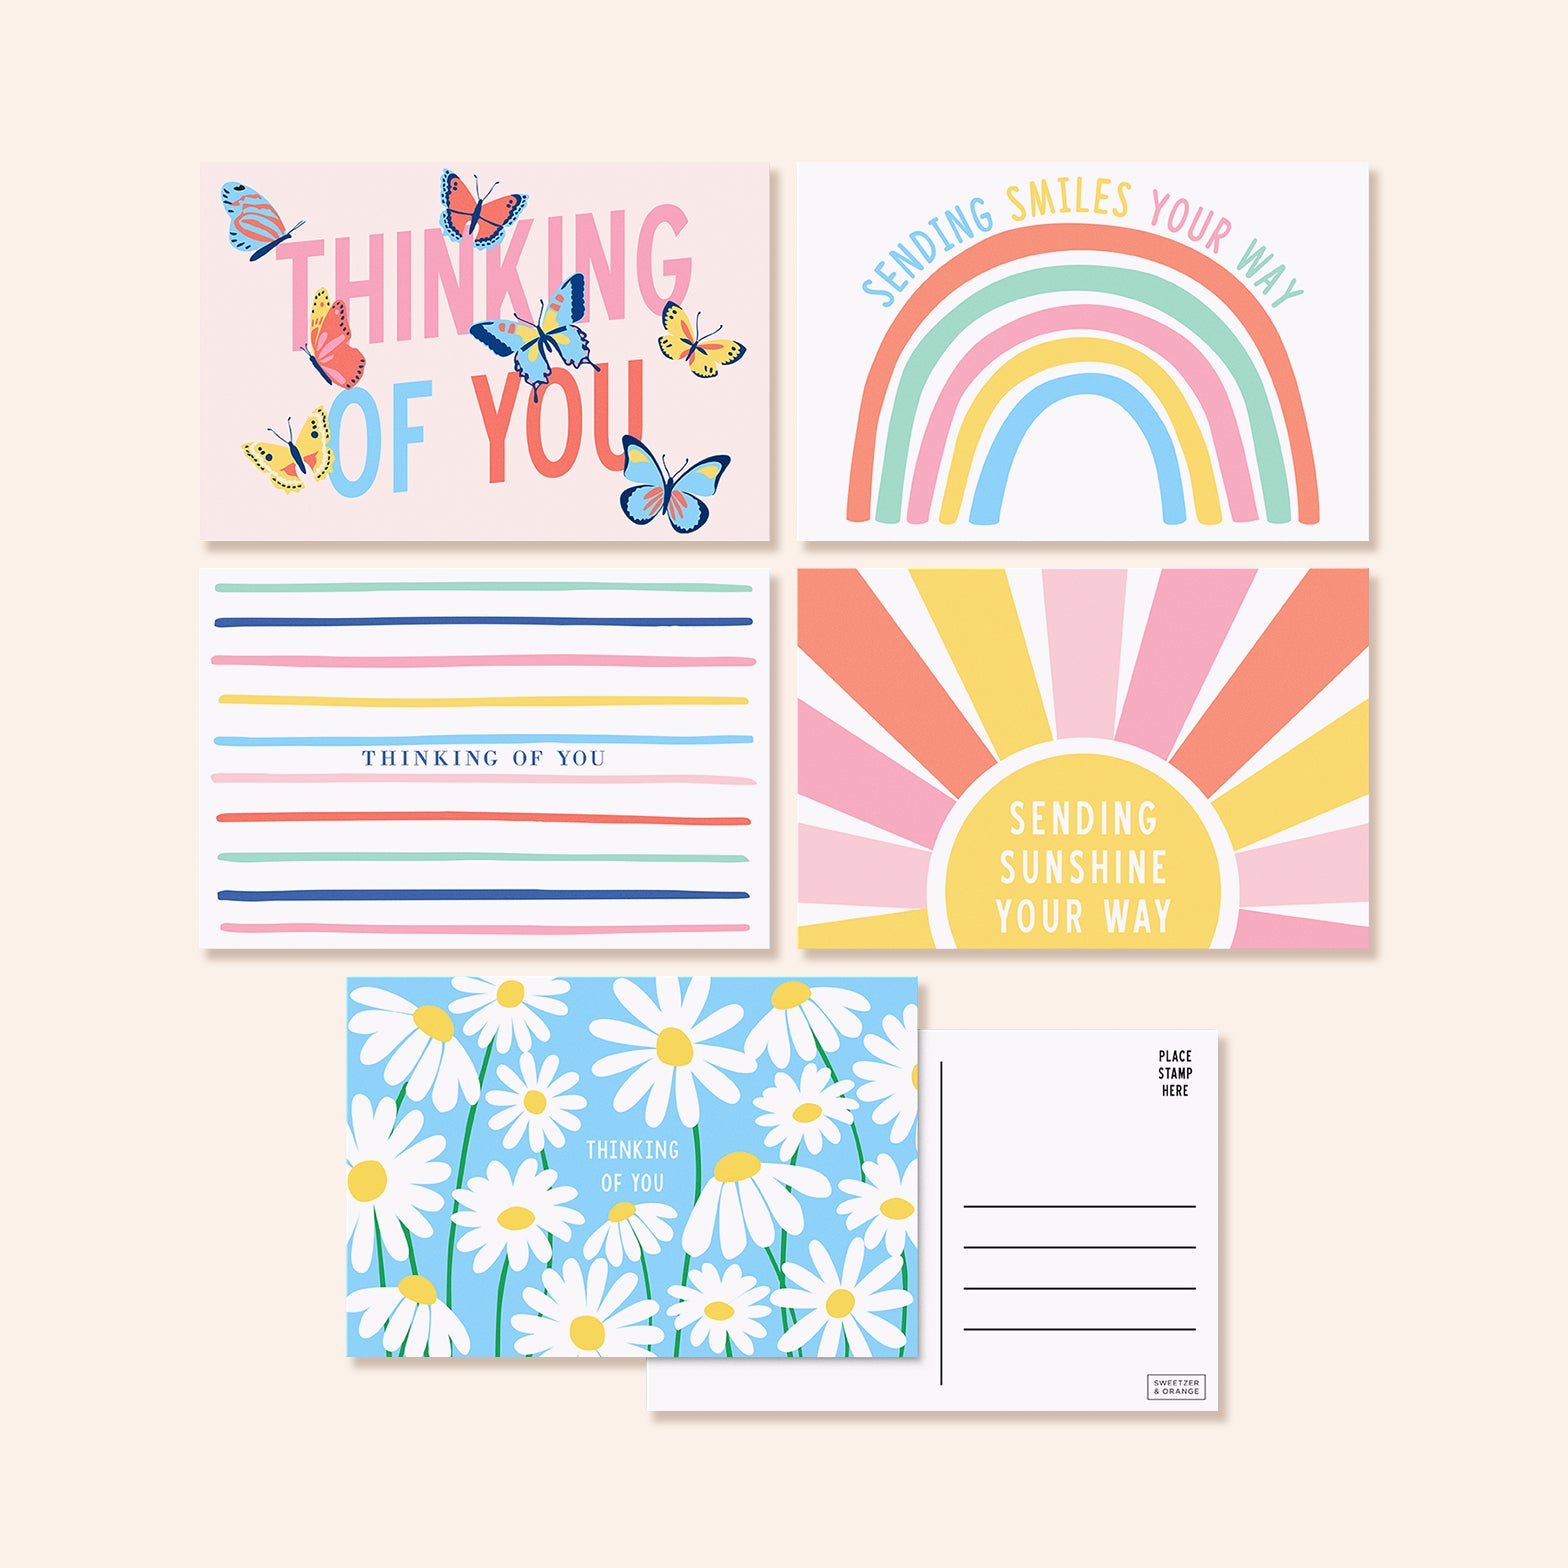 Thinking of You Postcards | Set of 50